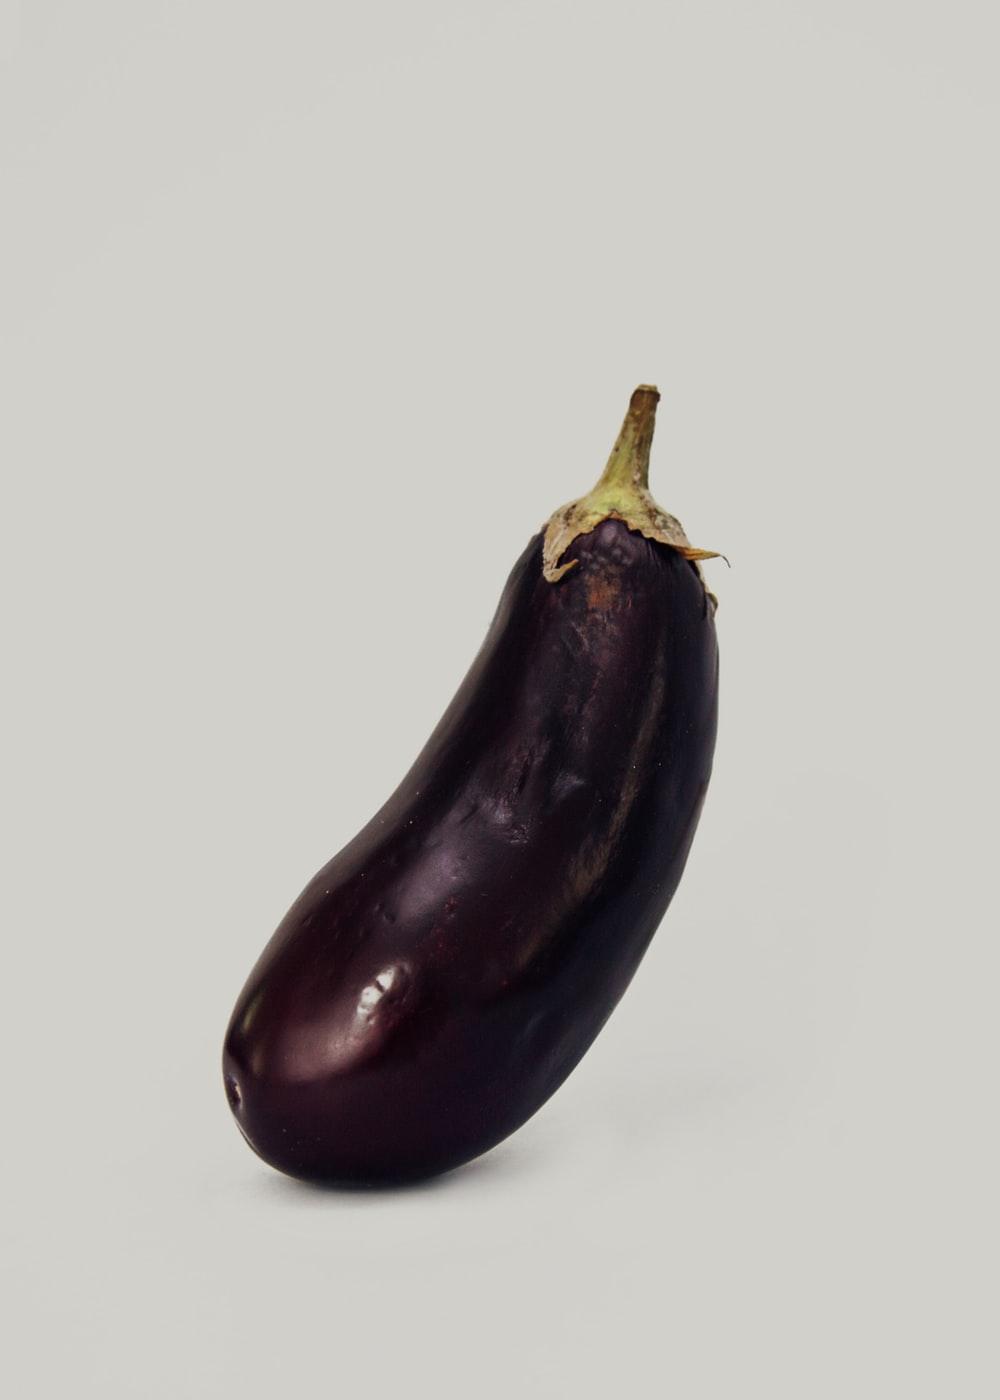 Eggplant Picture [HD]. Download Free Image